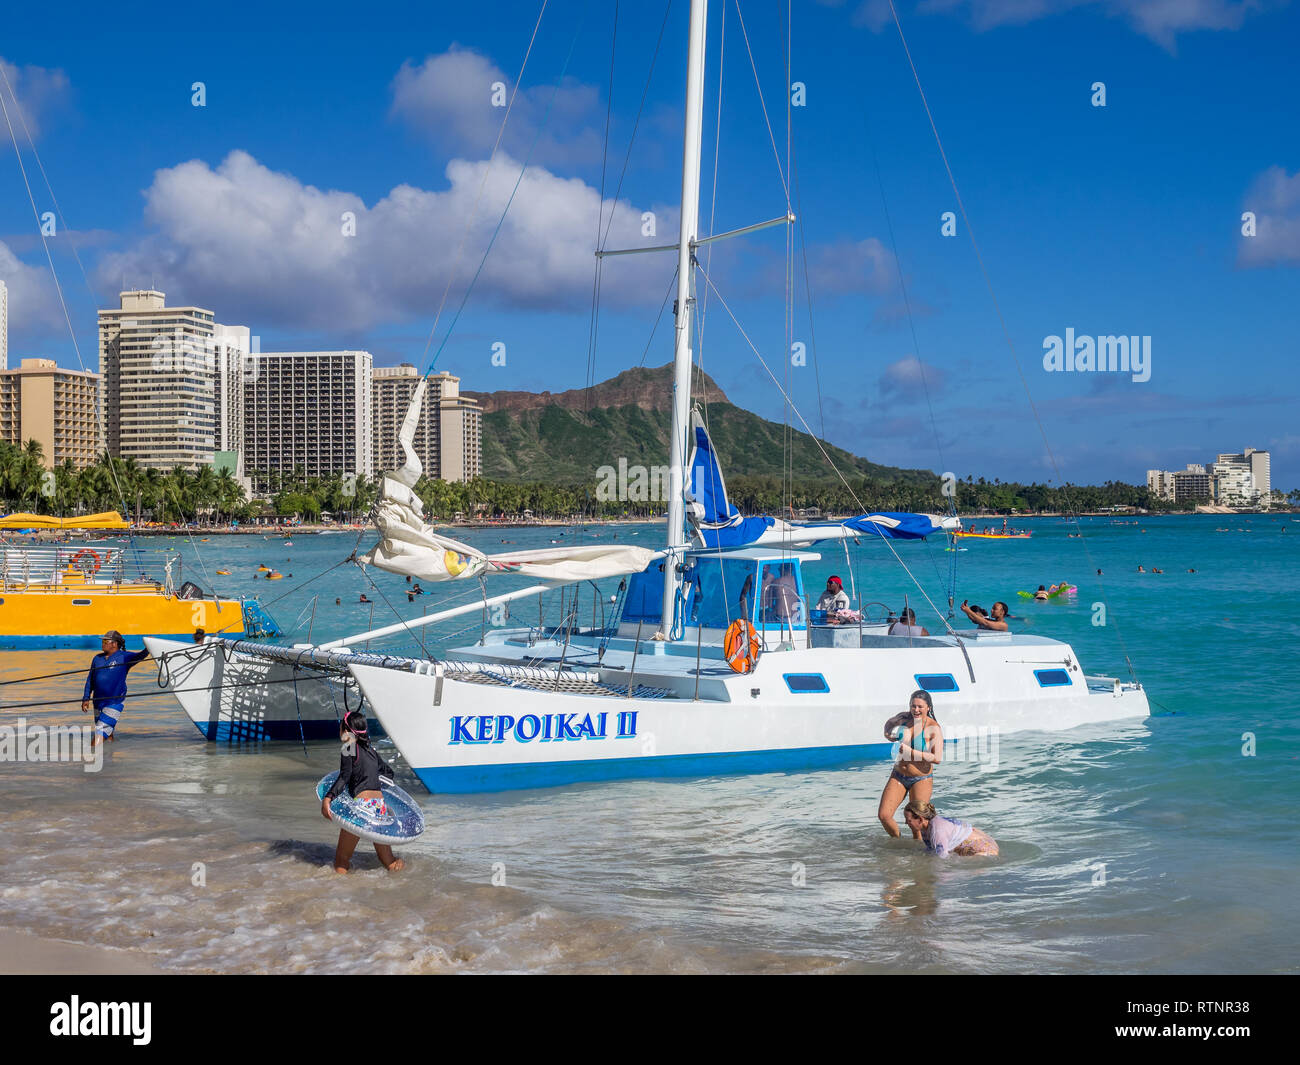 A catamaran waiting for tourists at Waikiki Beach on August 4, 2016 in Honolulu. Catamarans are a popular tourist activity at Waikiki Beach and offers Stock Photo